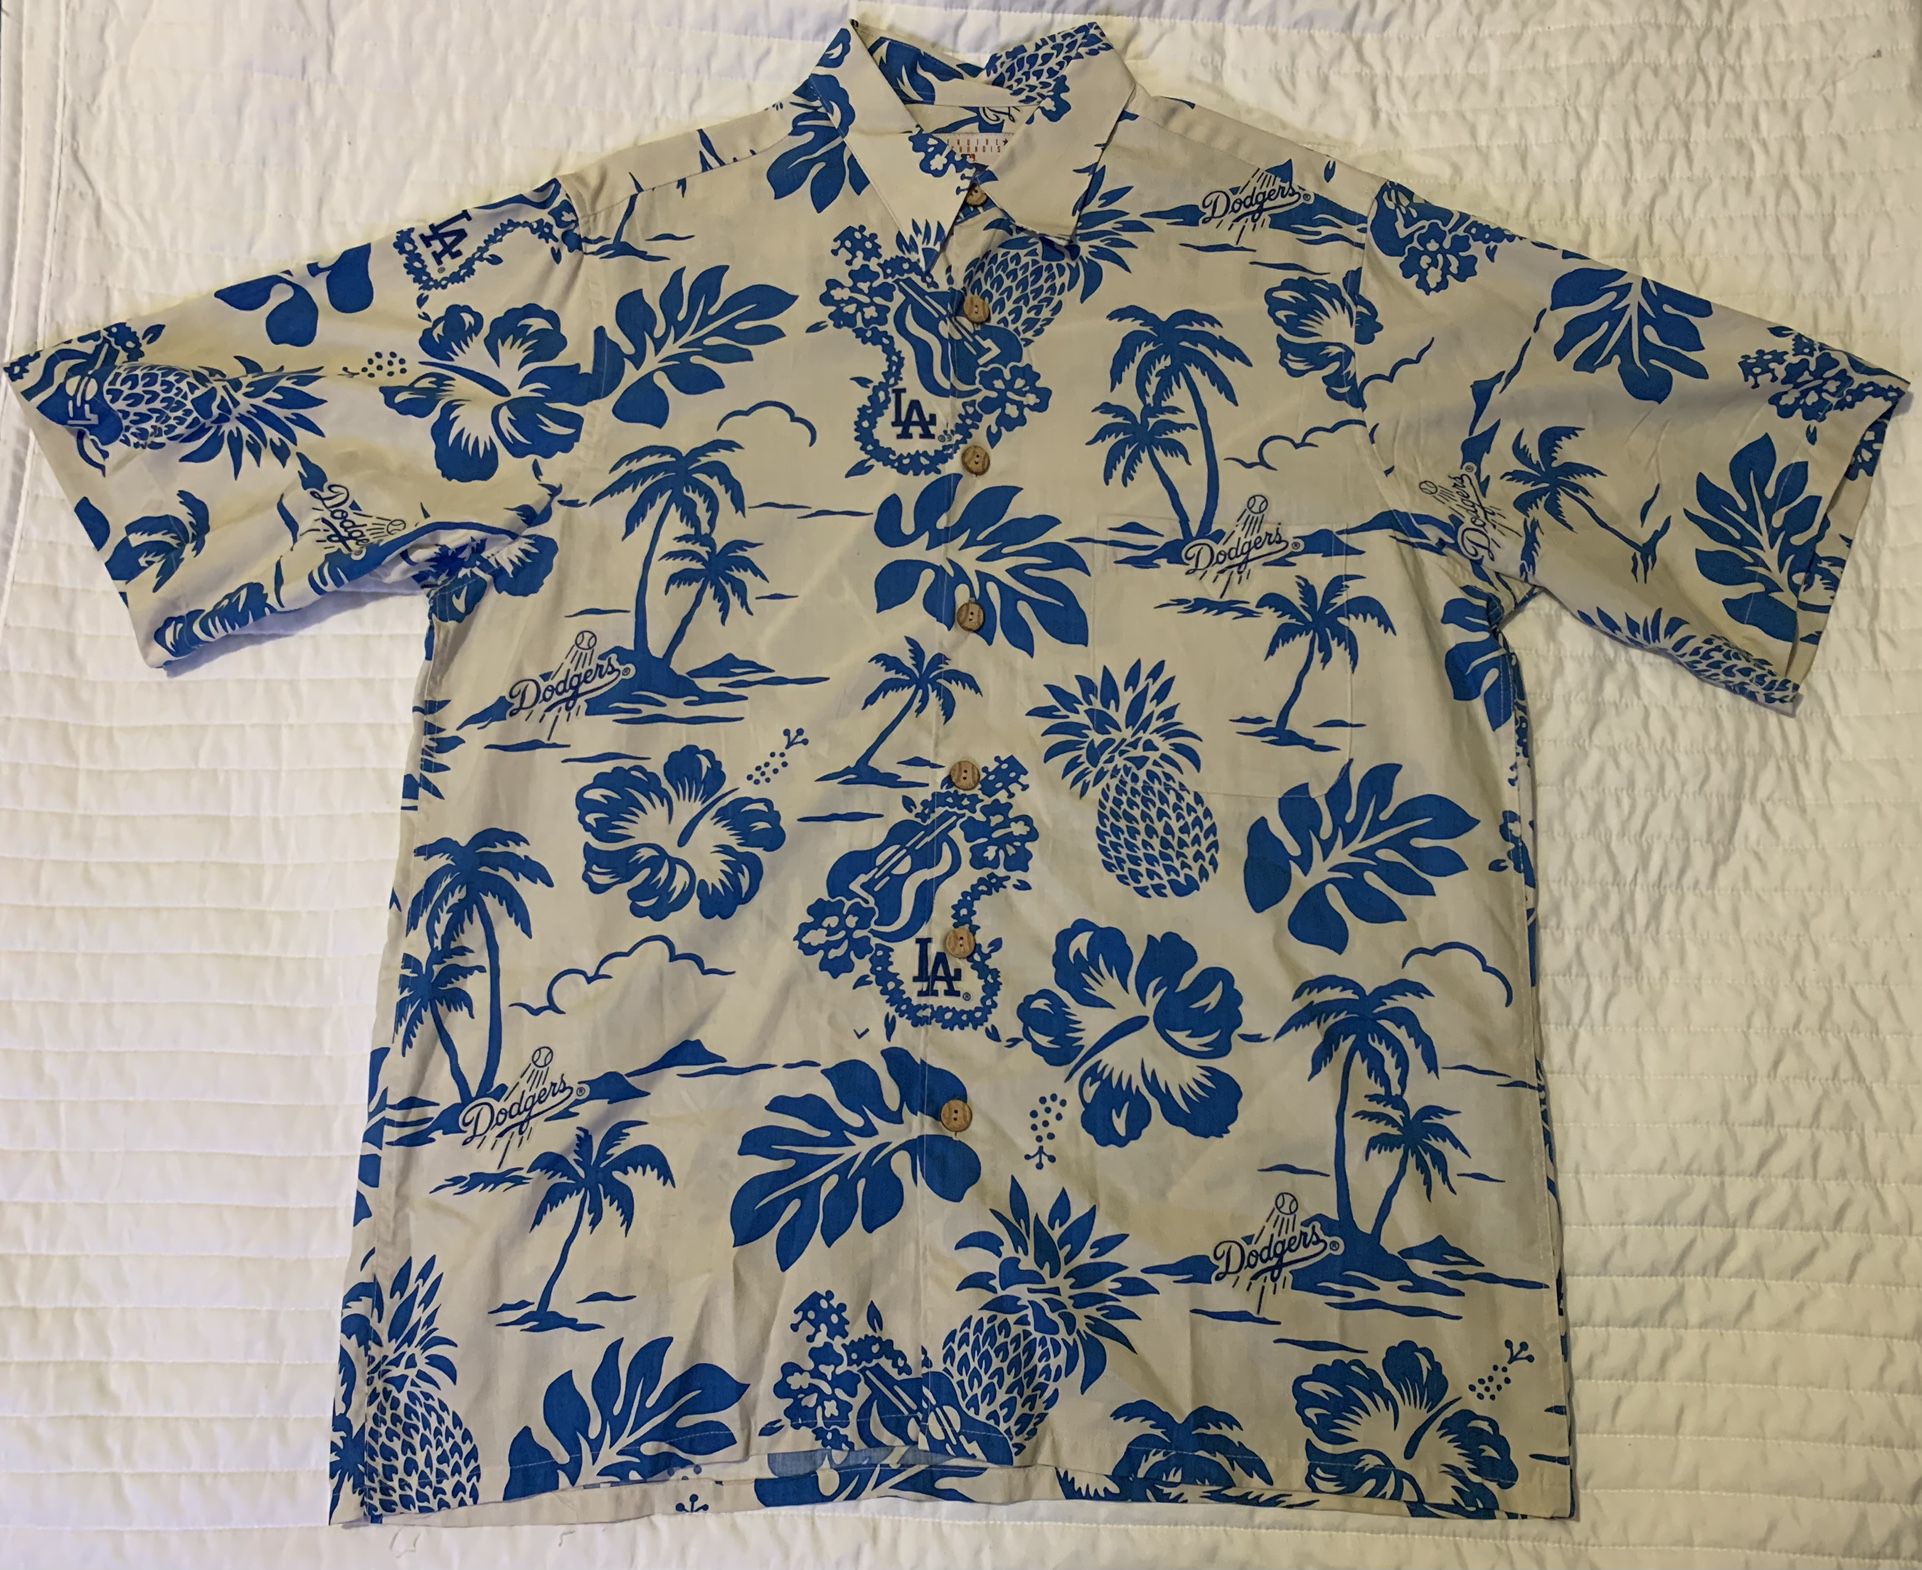 *Serious Buyers Only Please GENUINE MLB DODGERS REYN SPOONER ALOHA HAWAIIAN  SHIRT for Sale in Carson, CA - OfferUp